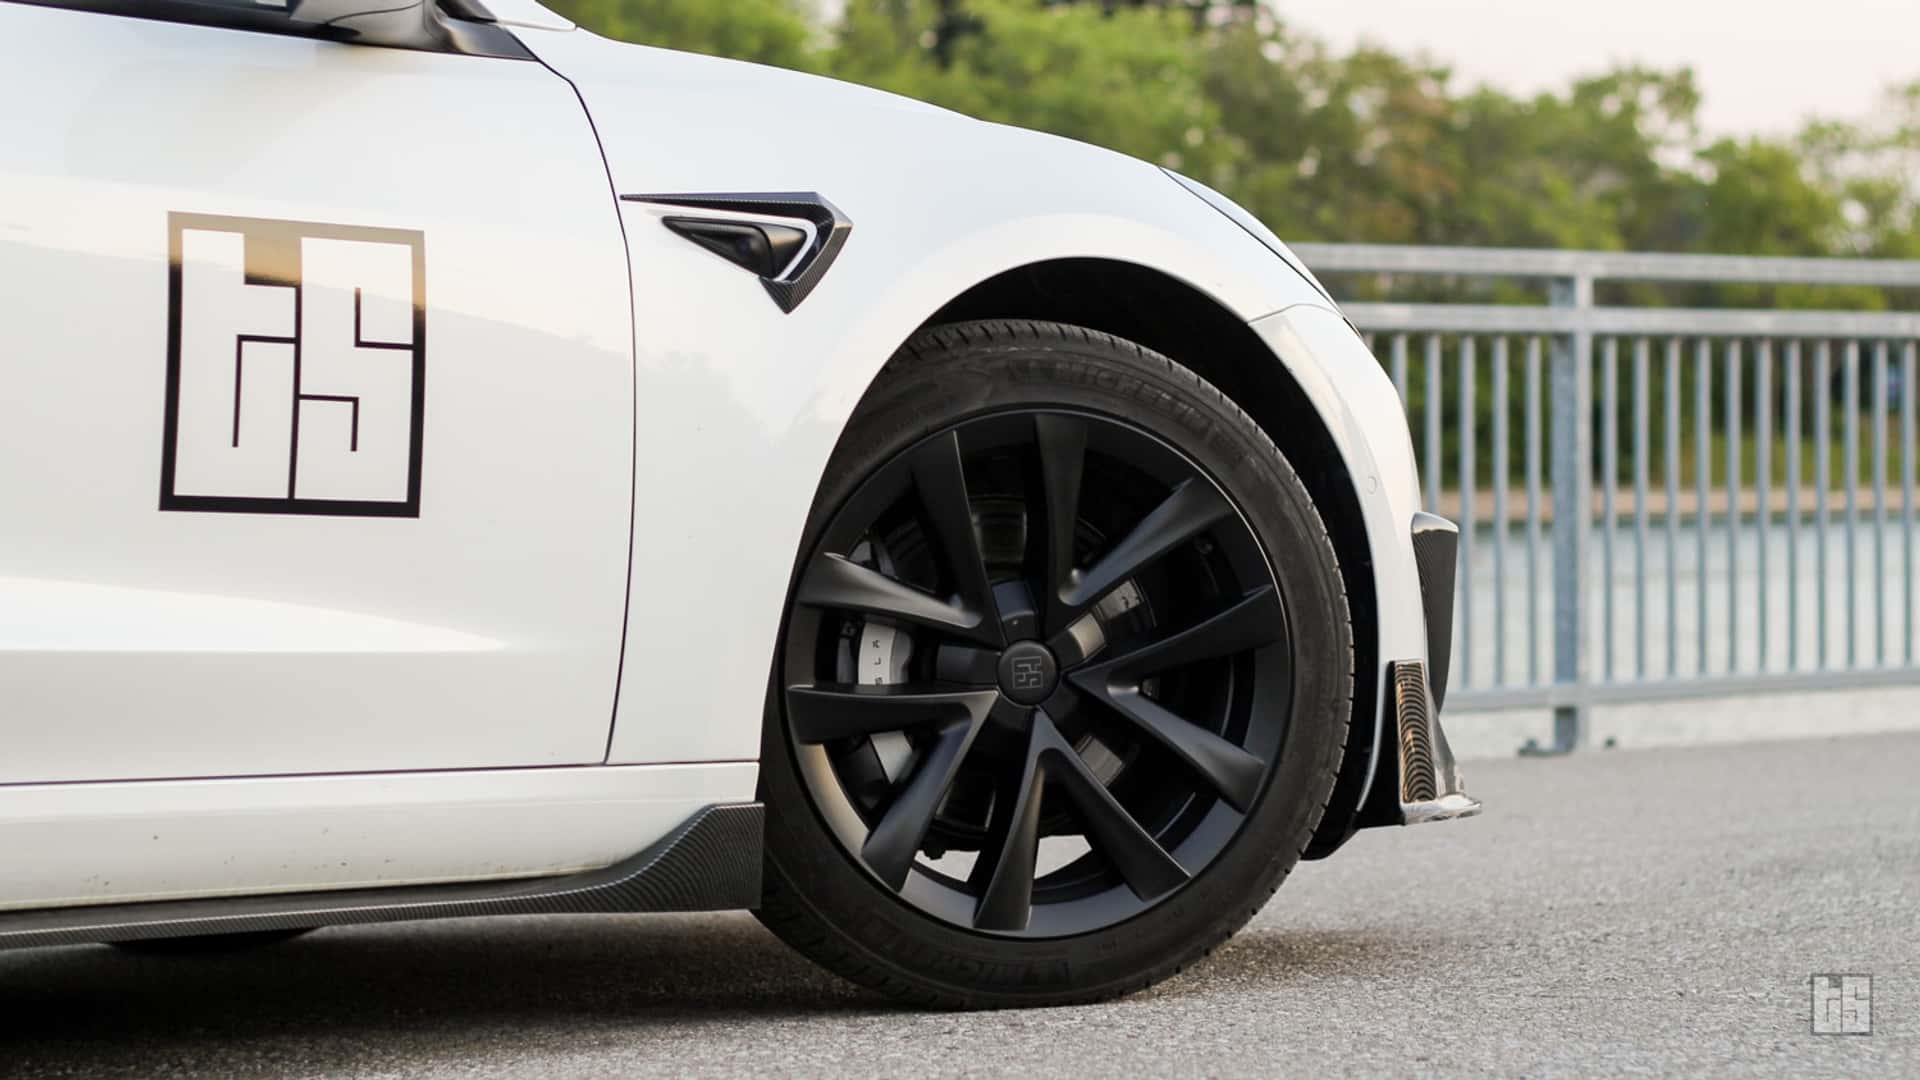 model y and 3 wheel covers by tesloid will transform your tesla in seconds